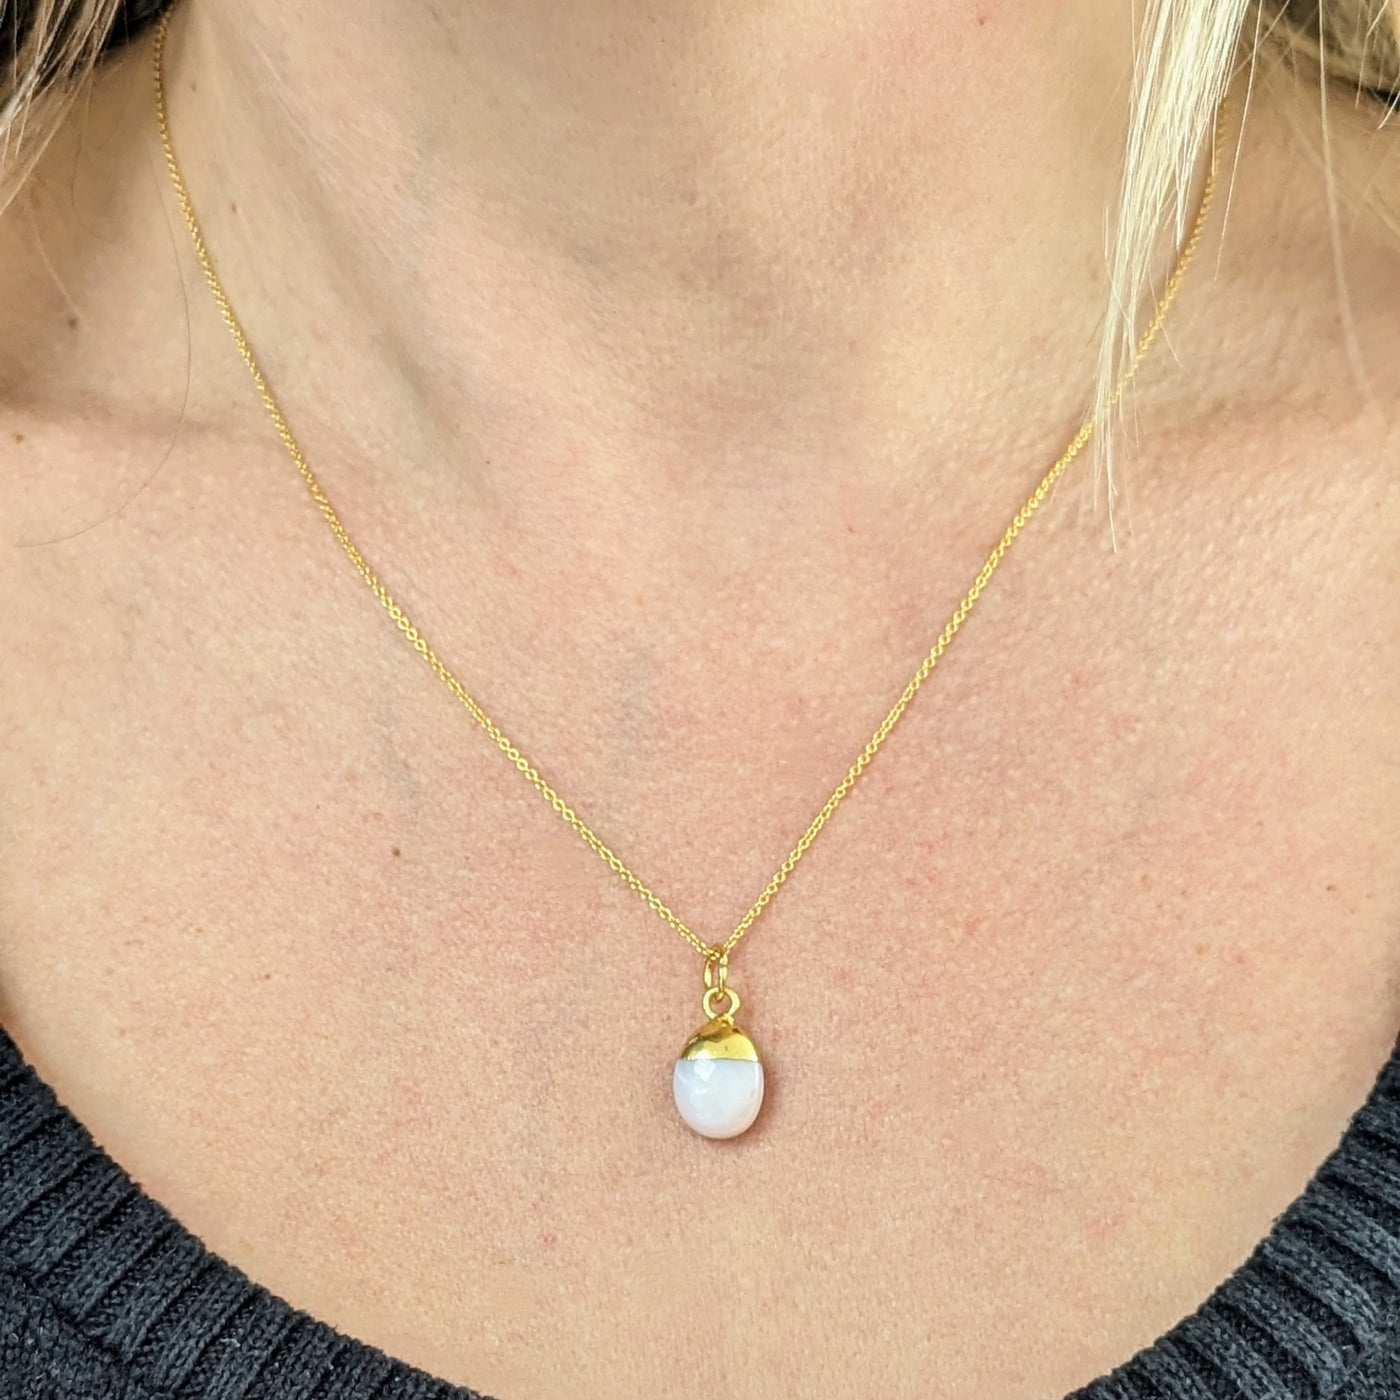 Pink Opal October Birthstone Necklace, Balance & Inner Peace